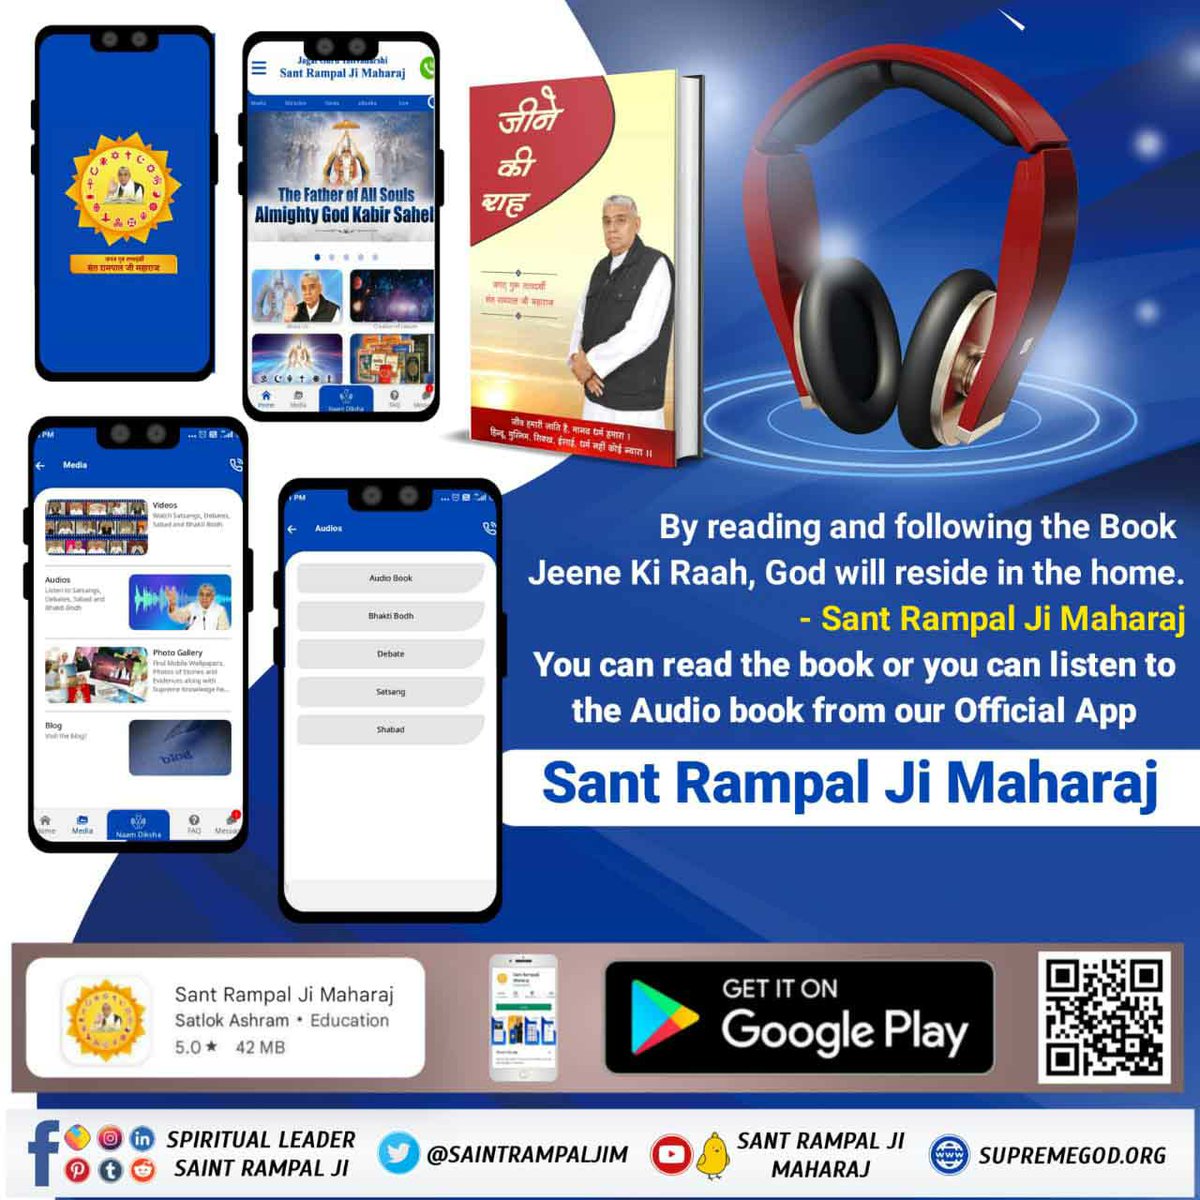 #AudioBook_JeeneKiRah Know from the holy book 'The Way of Living' how sins can be avoided. Download Official App for Listening Audio Book 'SANT RAMPAL JI MAHARAJ'